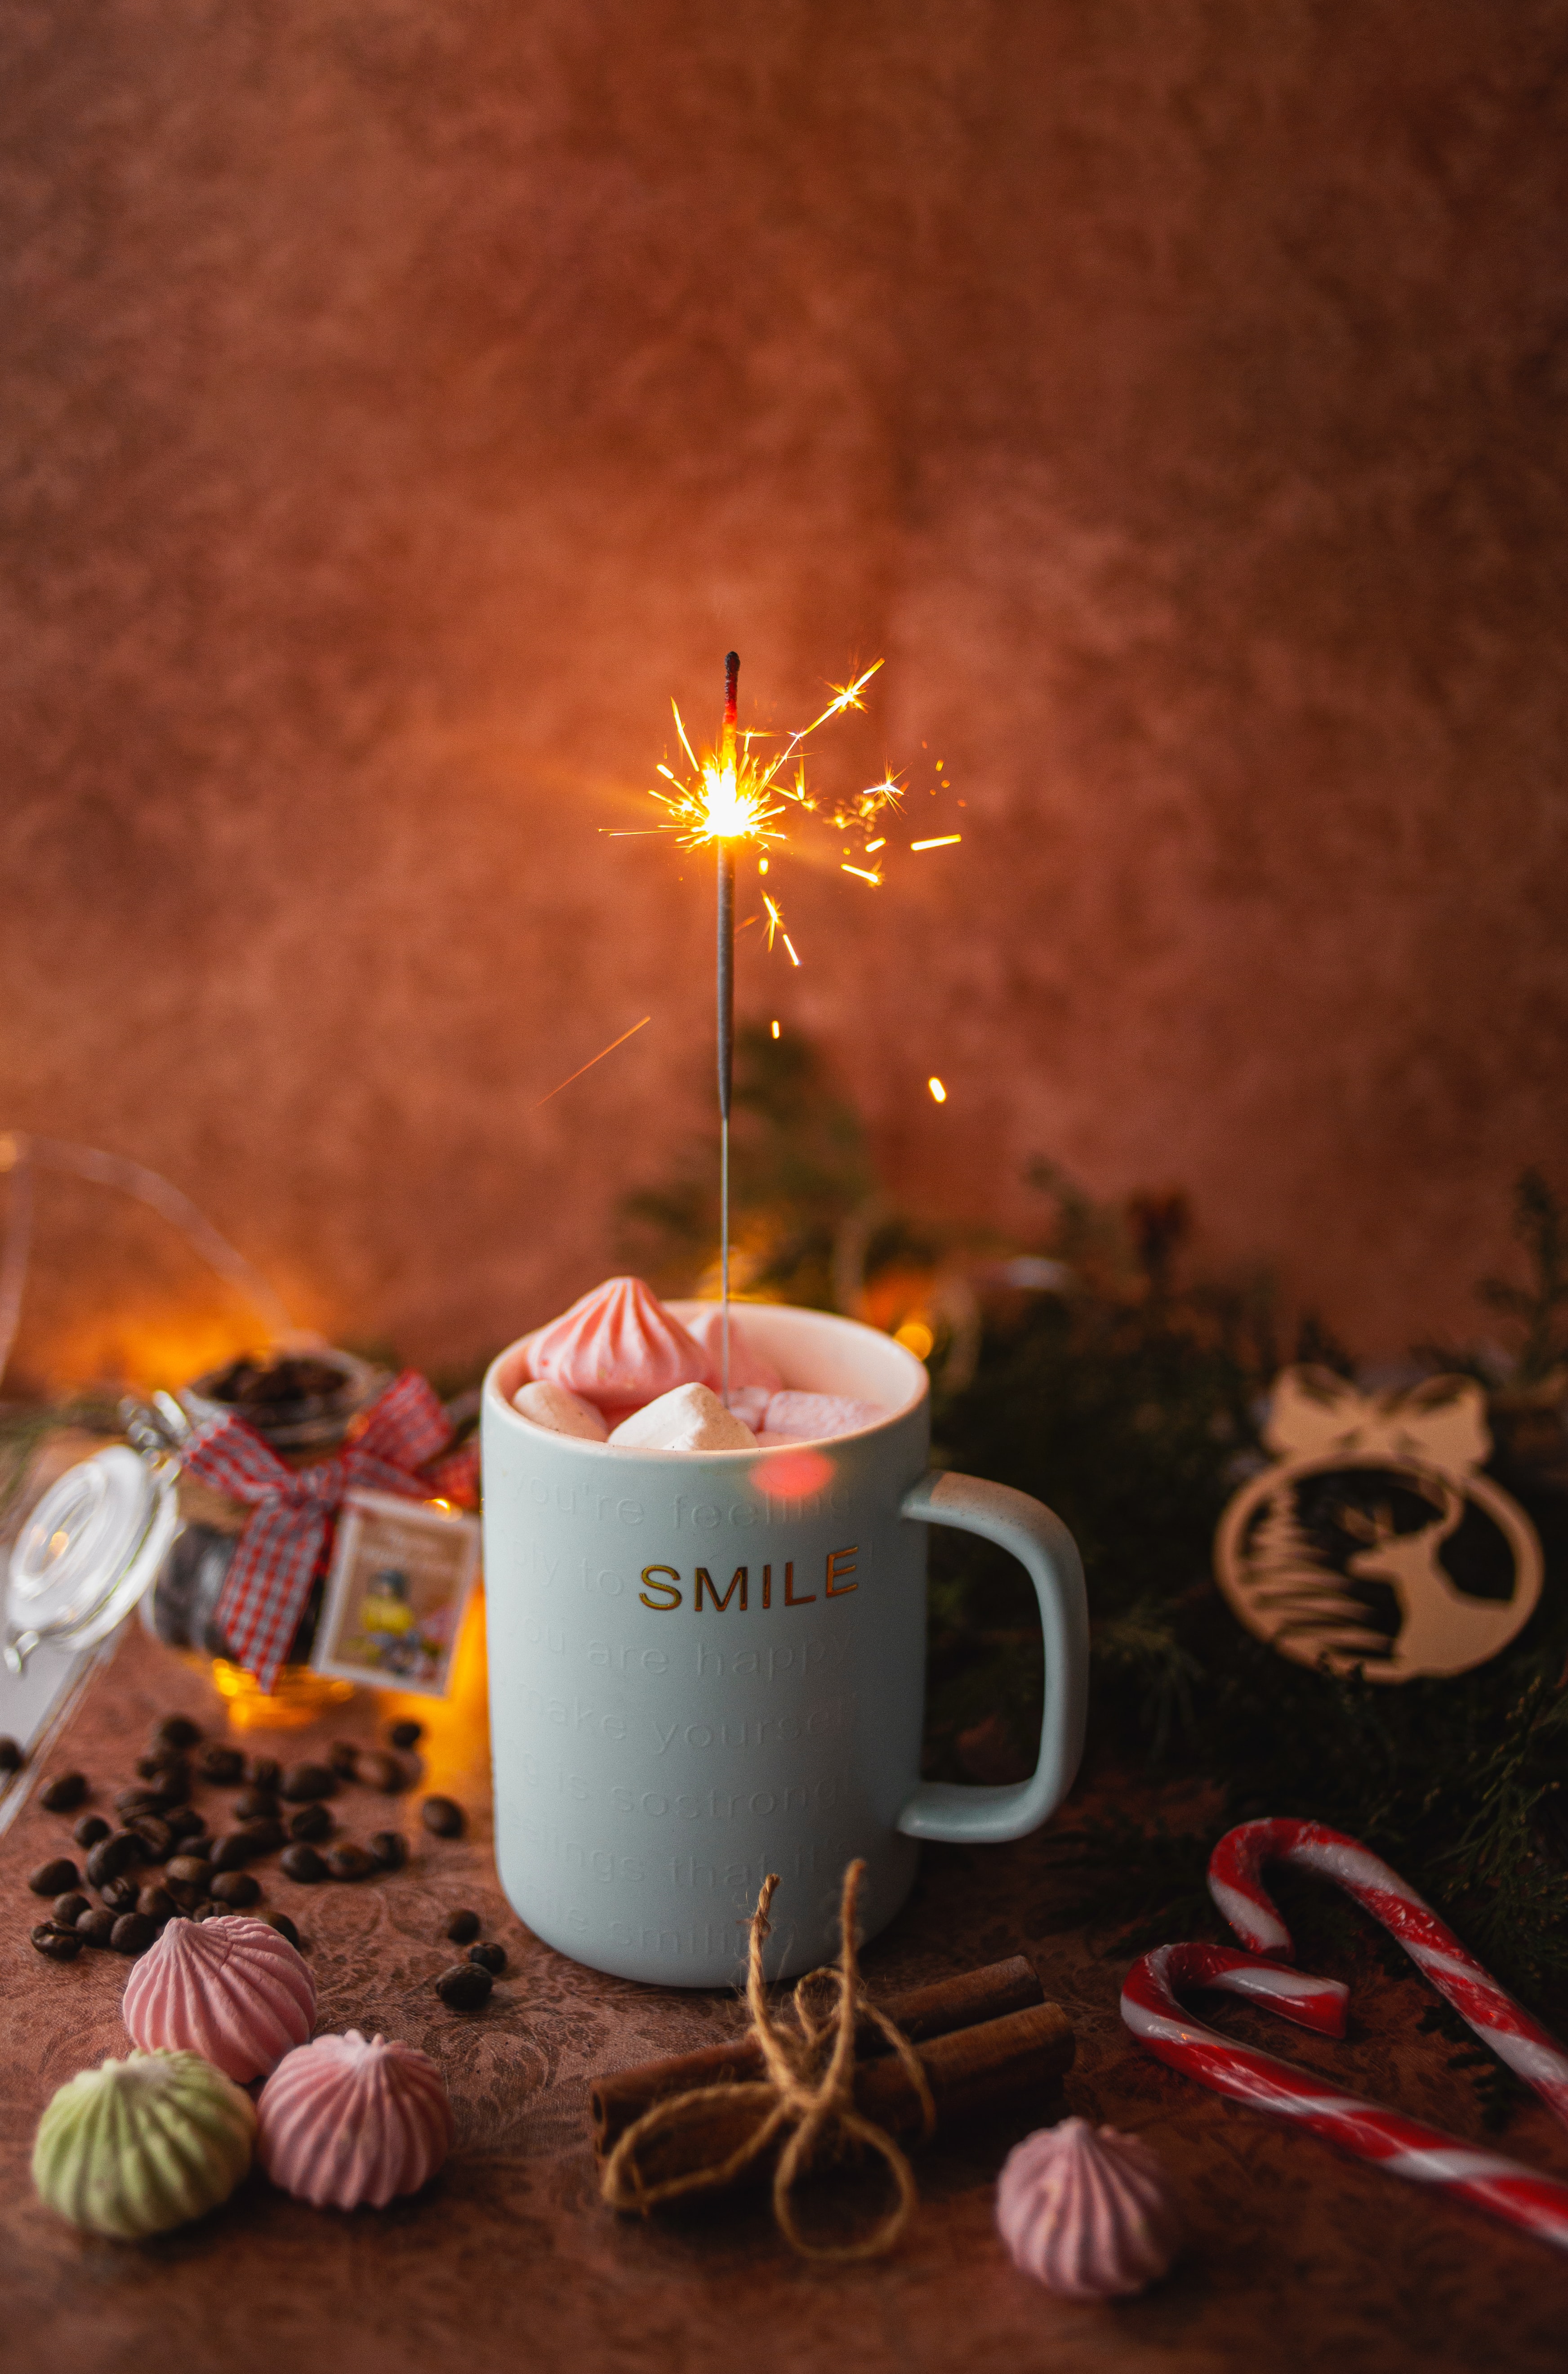 mug, miscellanea, cup, holiday, sparks, miscellaneous, marshmallow, bengal lights, sparklers, zephyr Free Stock Photo